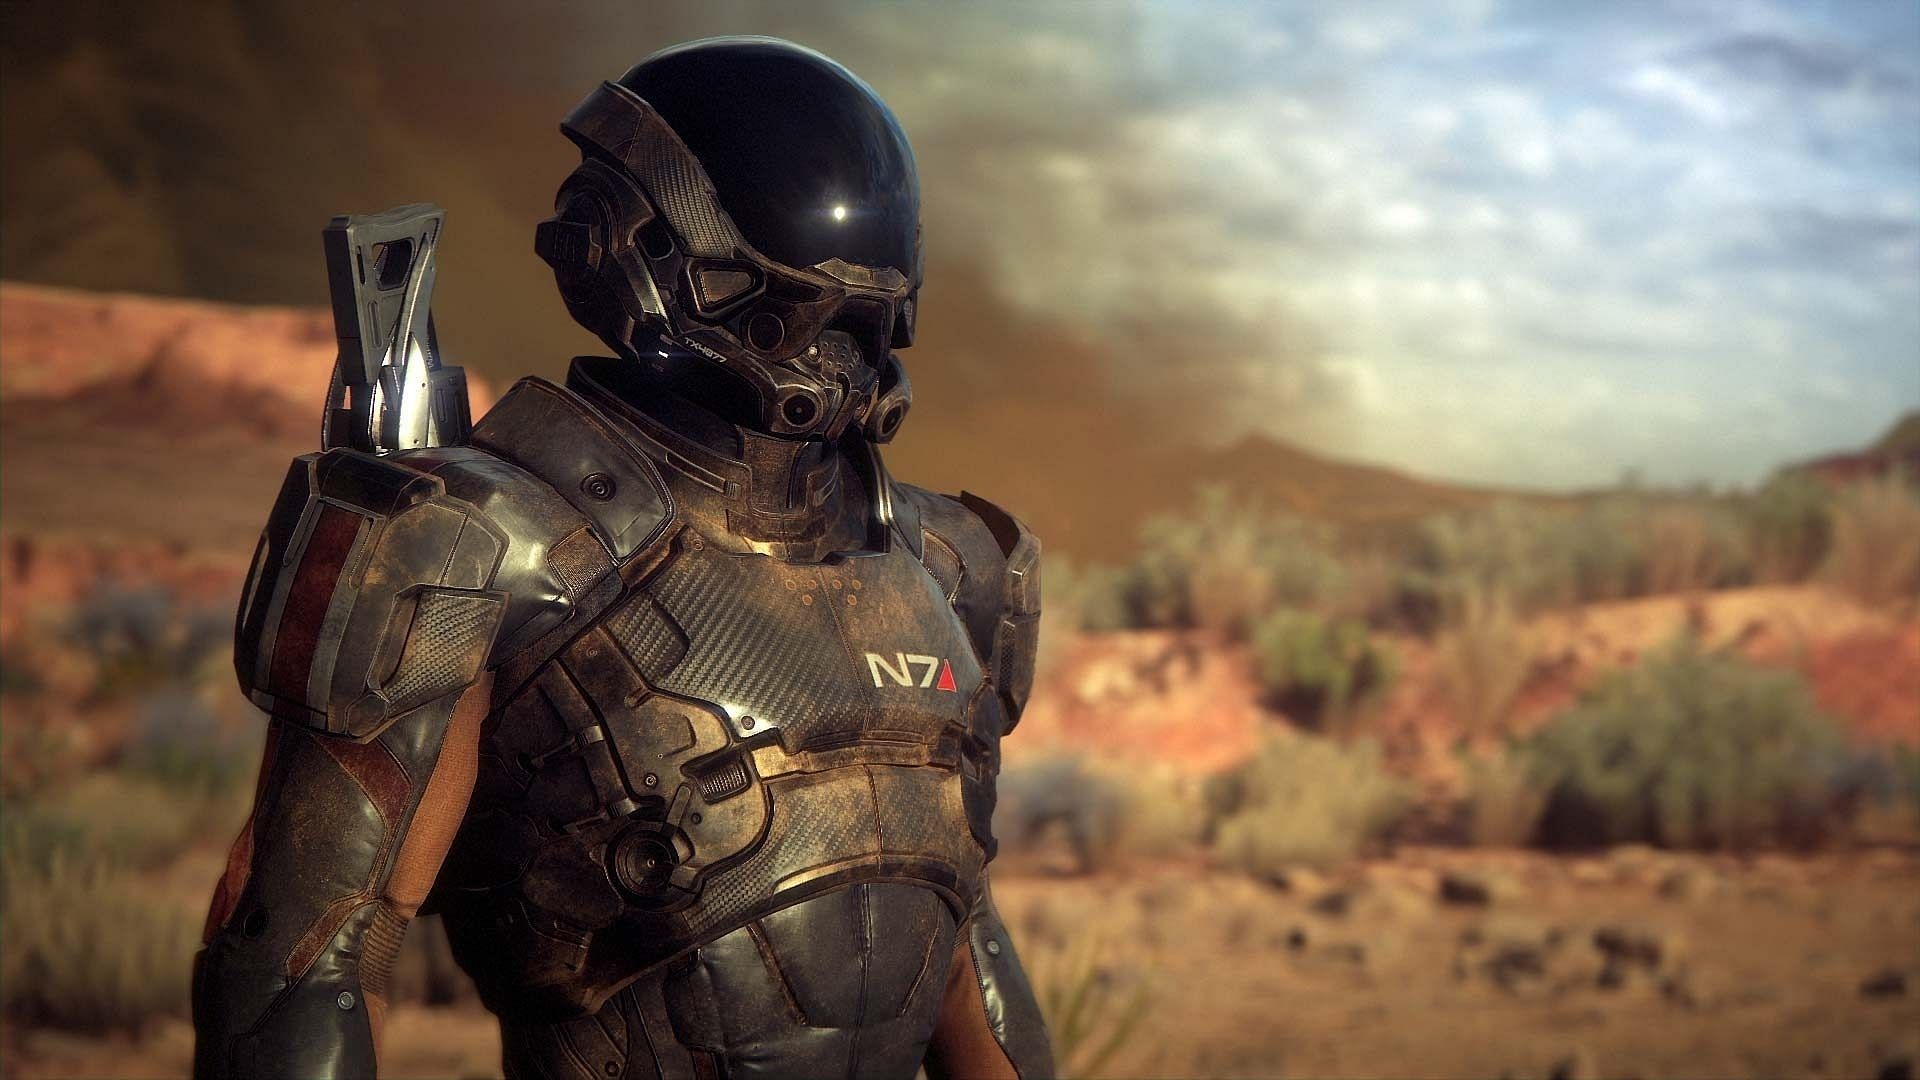 Mass Effect Andromeda, a sequel to the original Mass Effect video games, was widely panned by fans and critics alike (Image via BioWare)